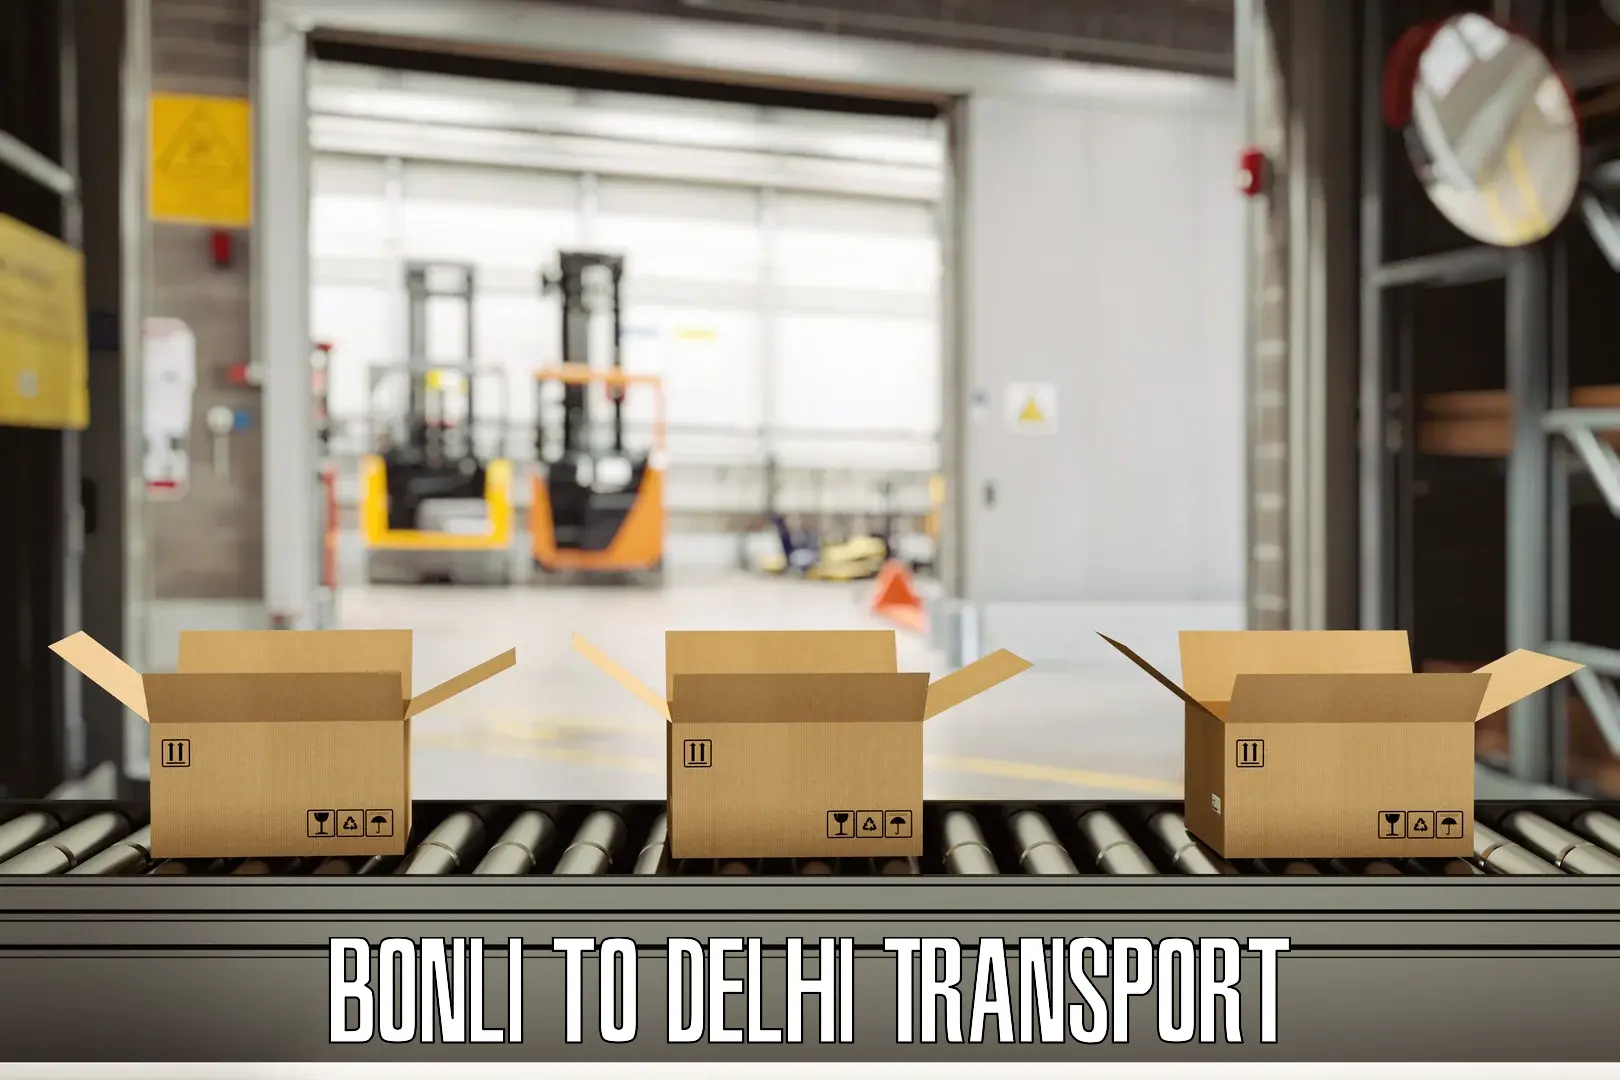 Shipping services Bonli to NCR